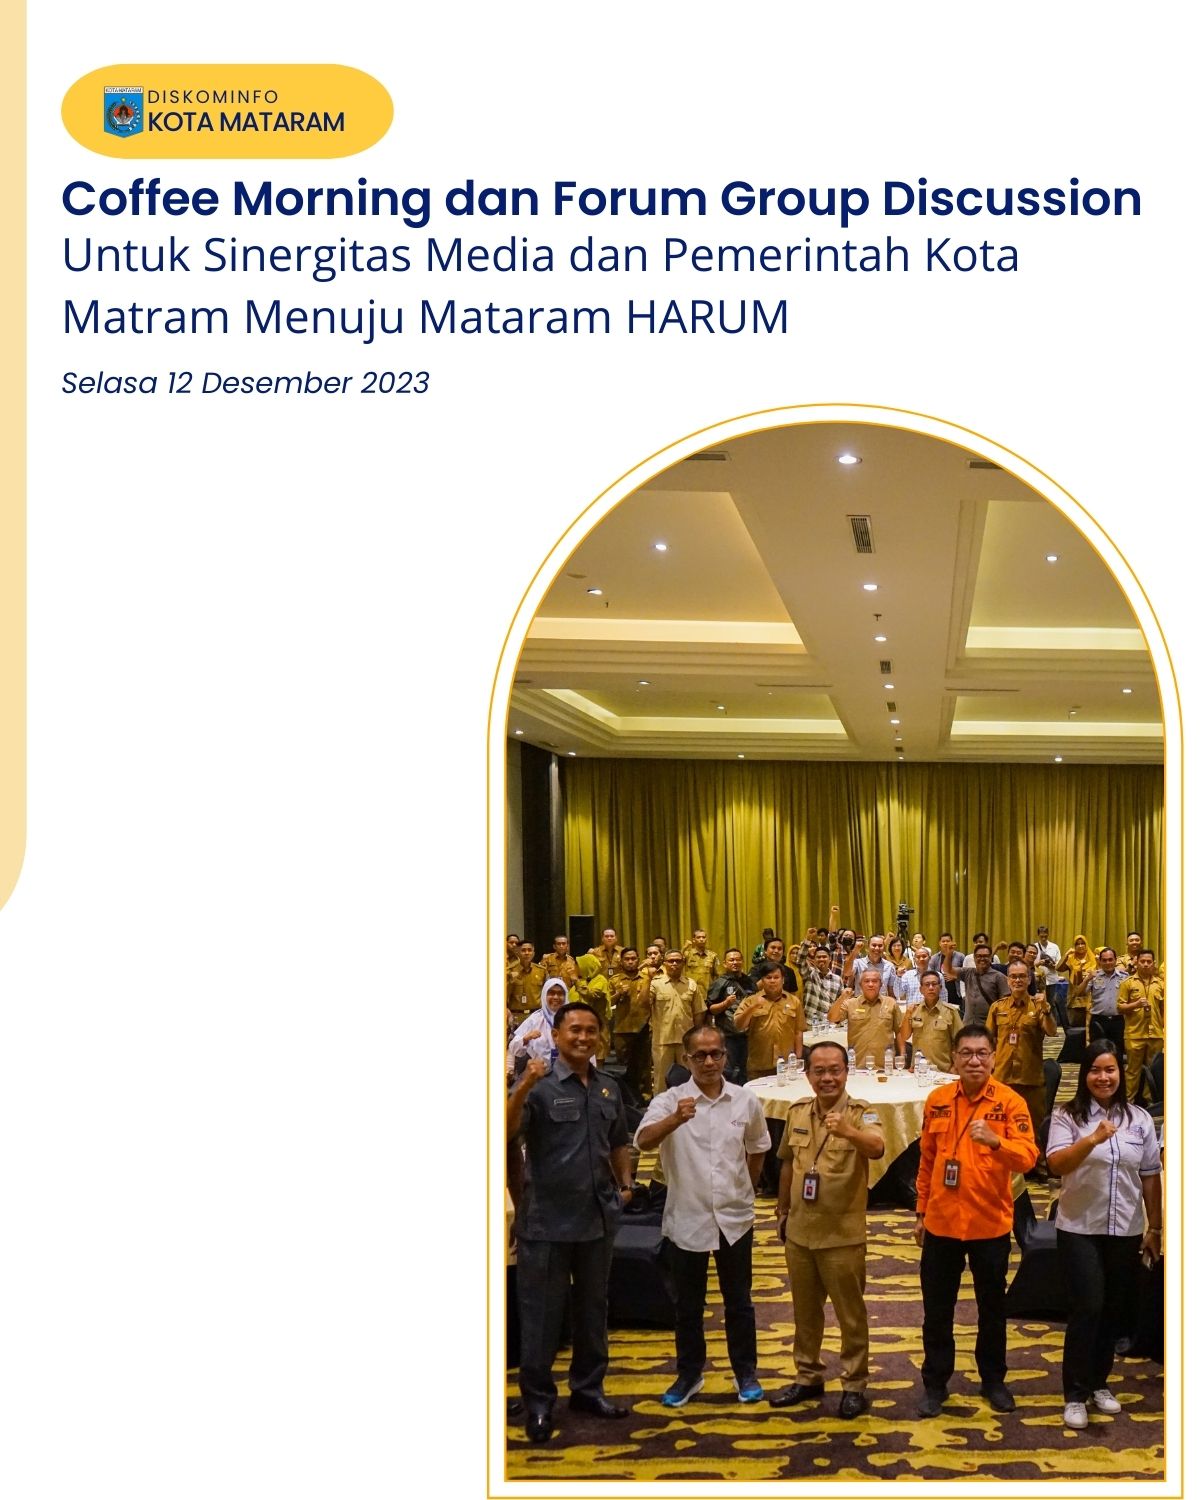 COFFEE MORNING DAN FORUM GROUP DISCUSSION